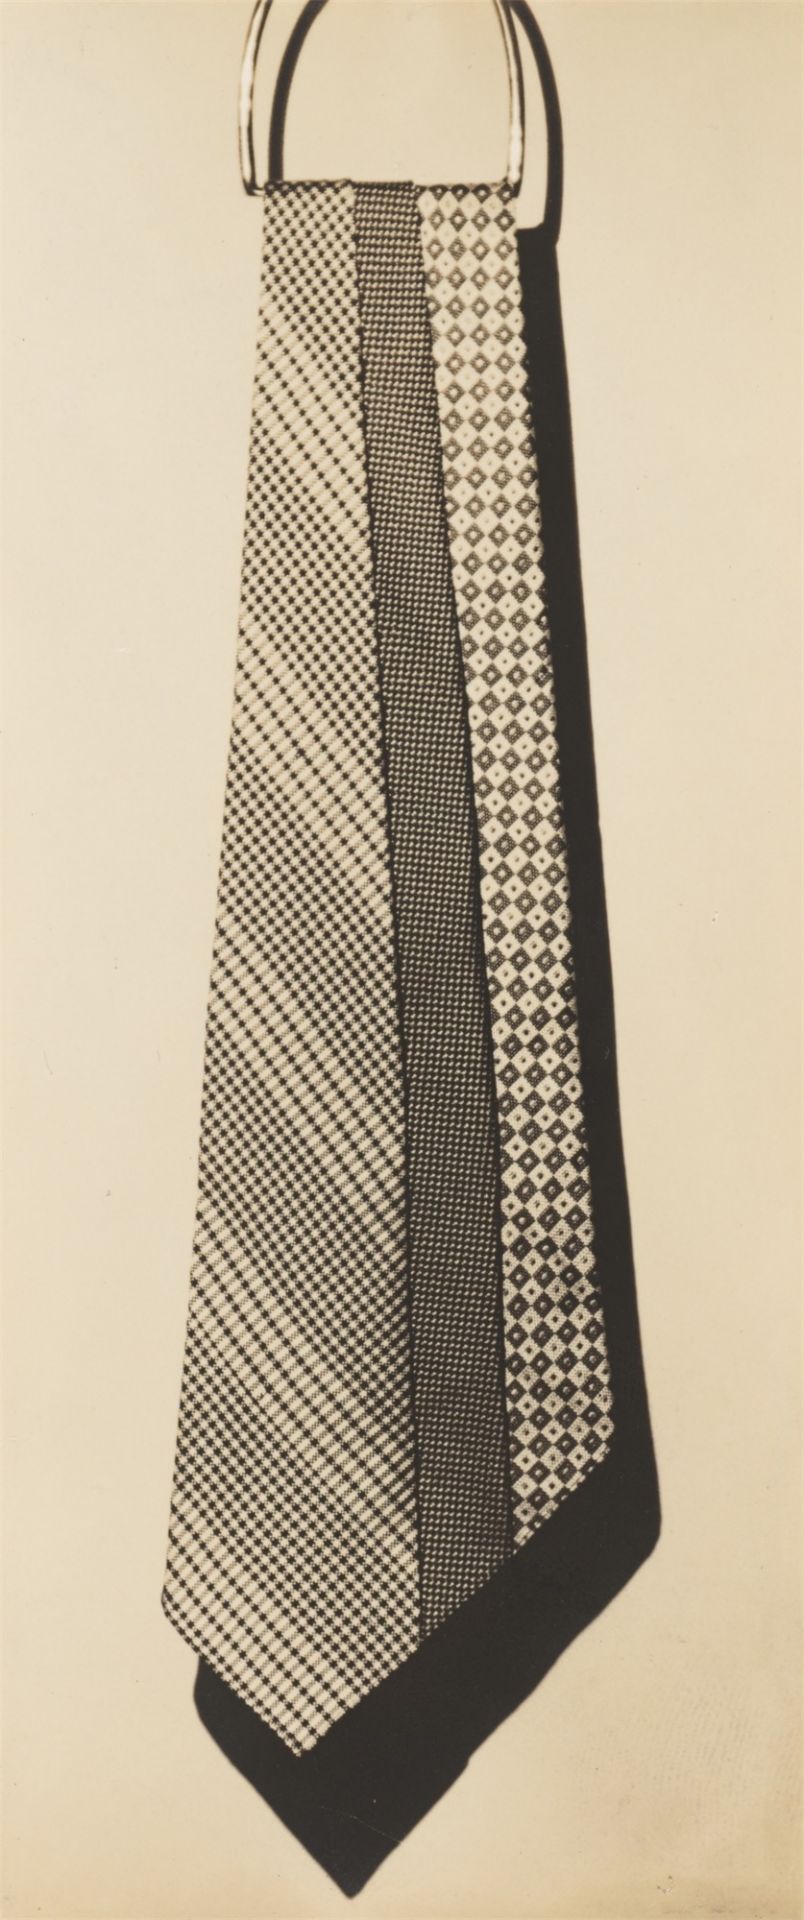 Paul Outerbridge Jr.. Untitled (Ties Hanging from Ring). Um 1924/26